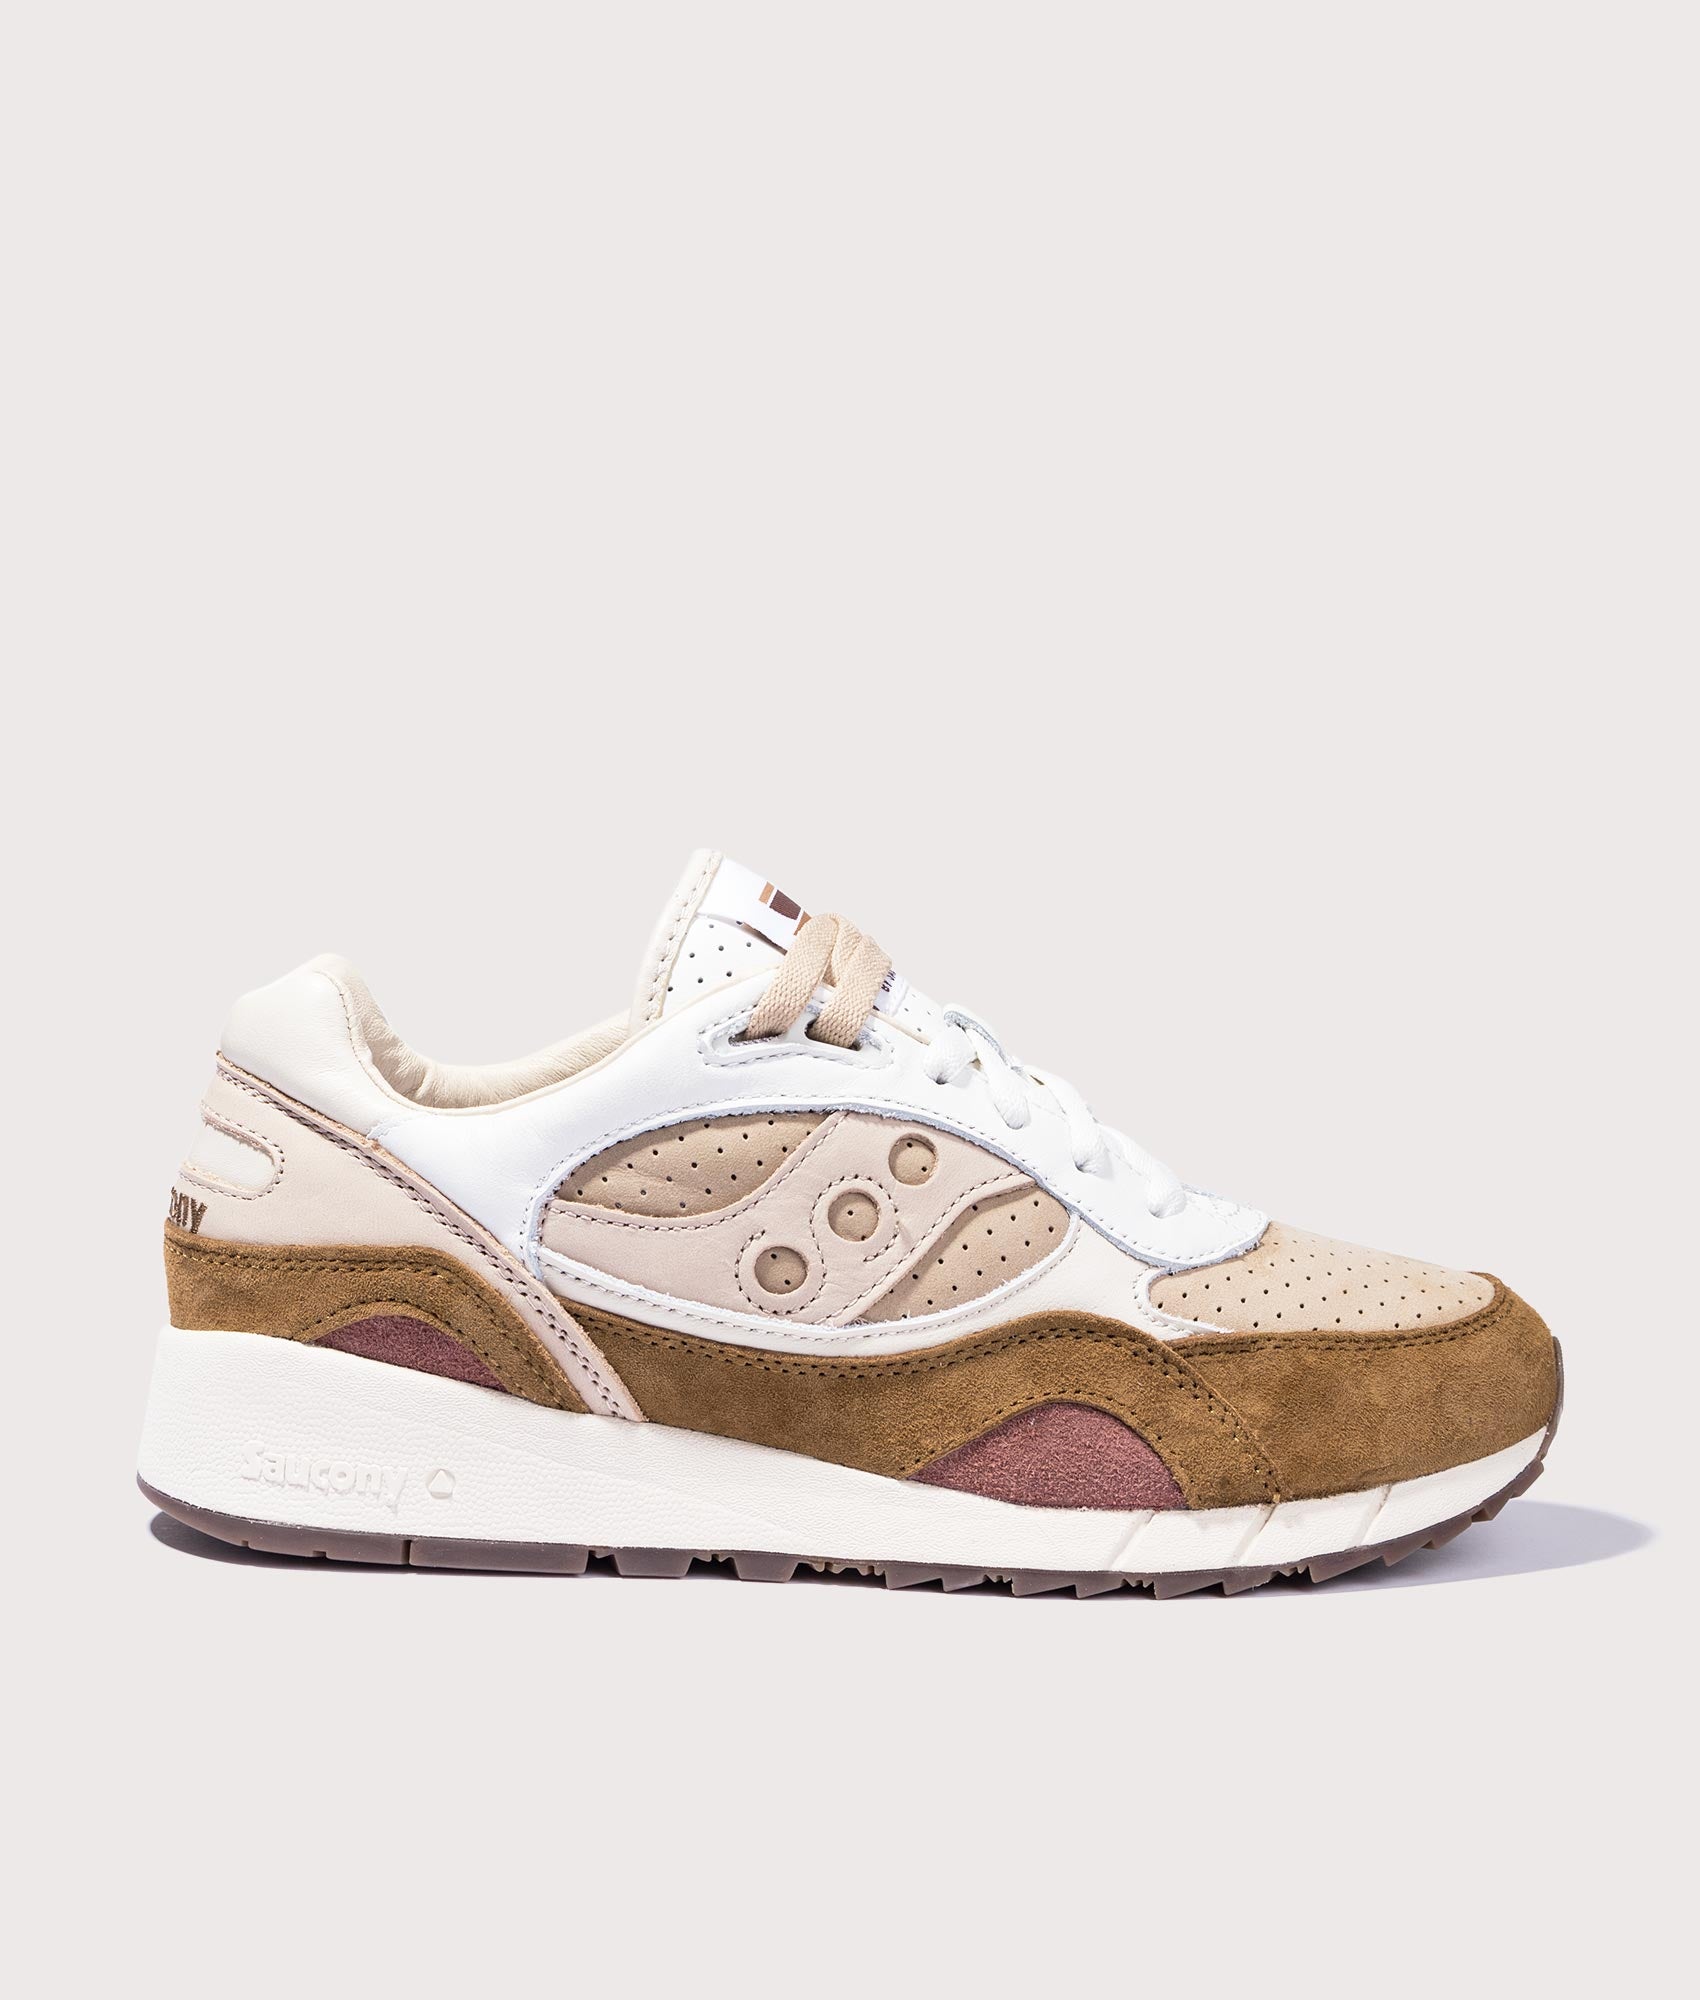 Saucony Mens Shadow 6000 Cappuccino Sneakers - Colour: 200 Brown/White - Size: 10